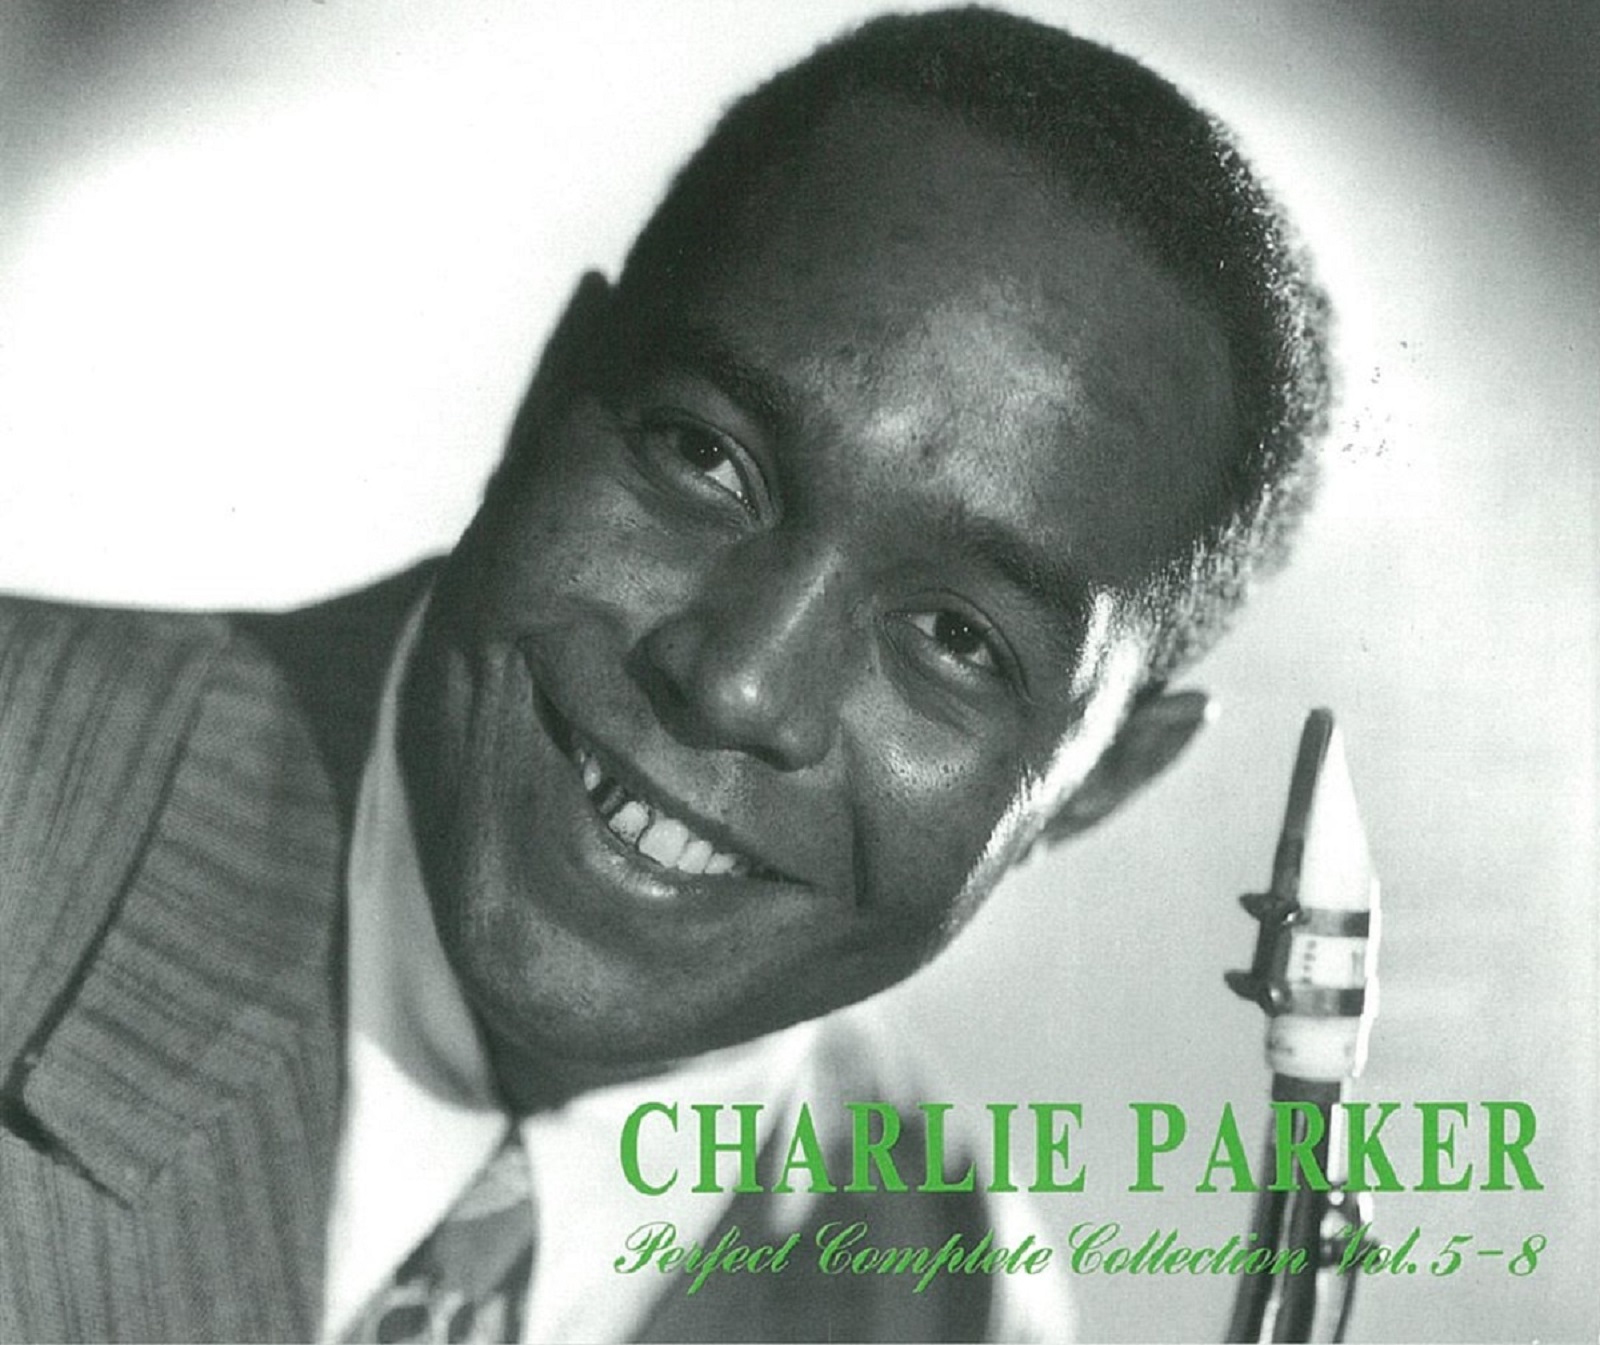 Charlie Parker Perfect Complete Collection Box disk5